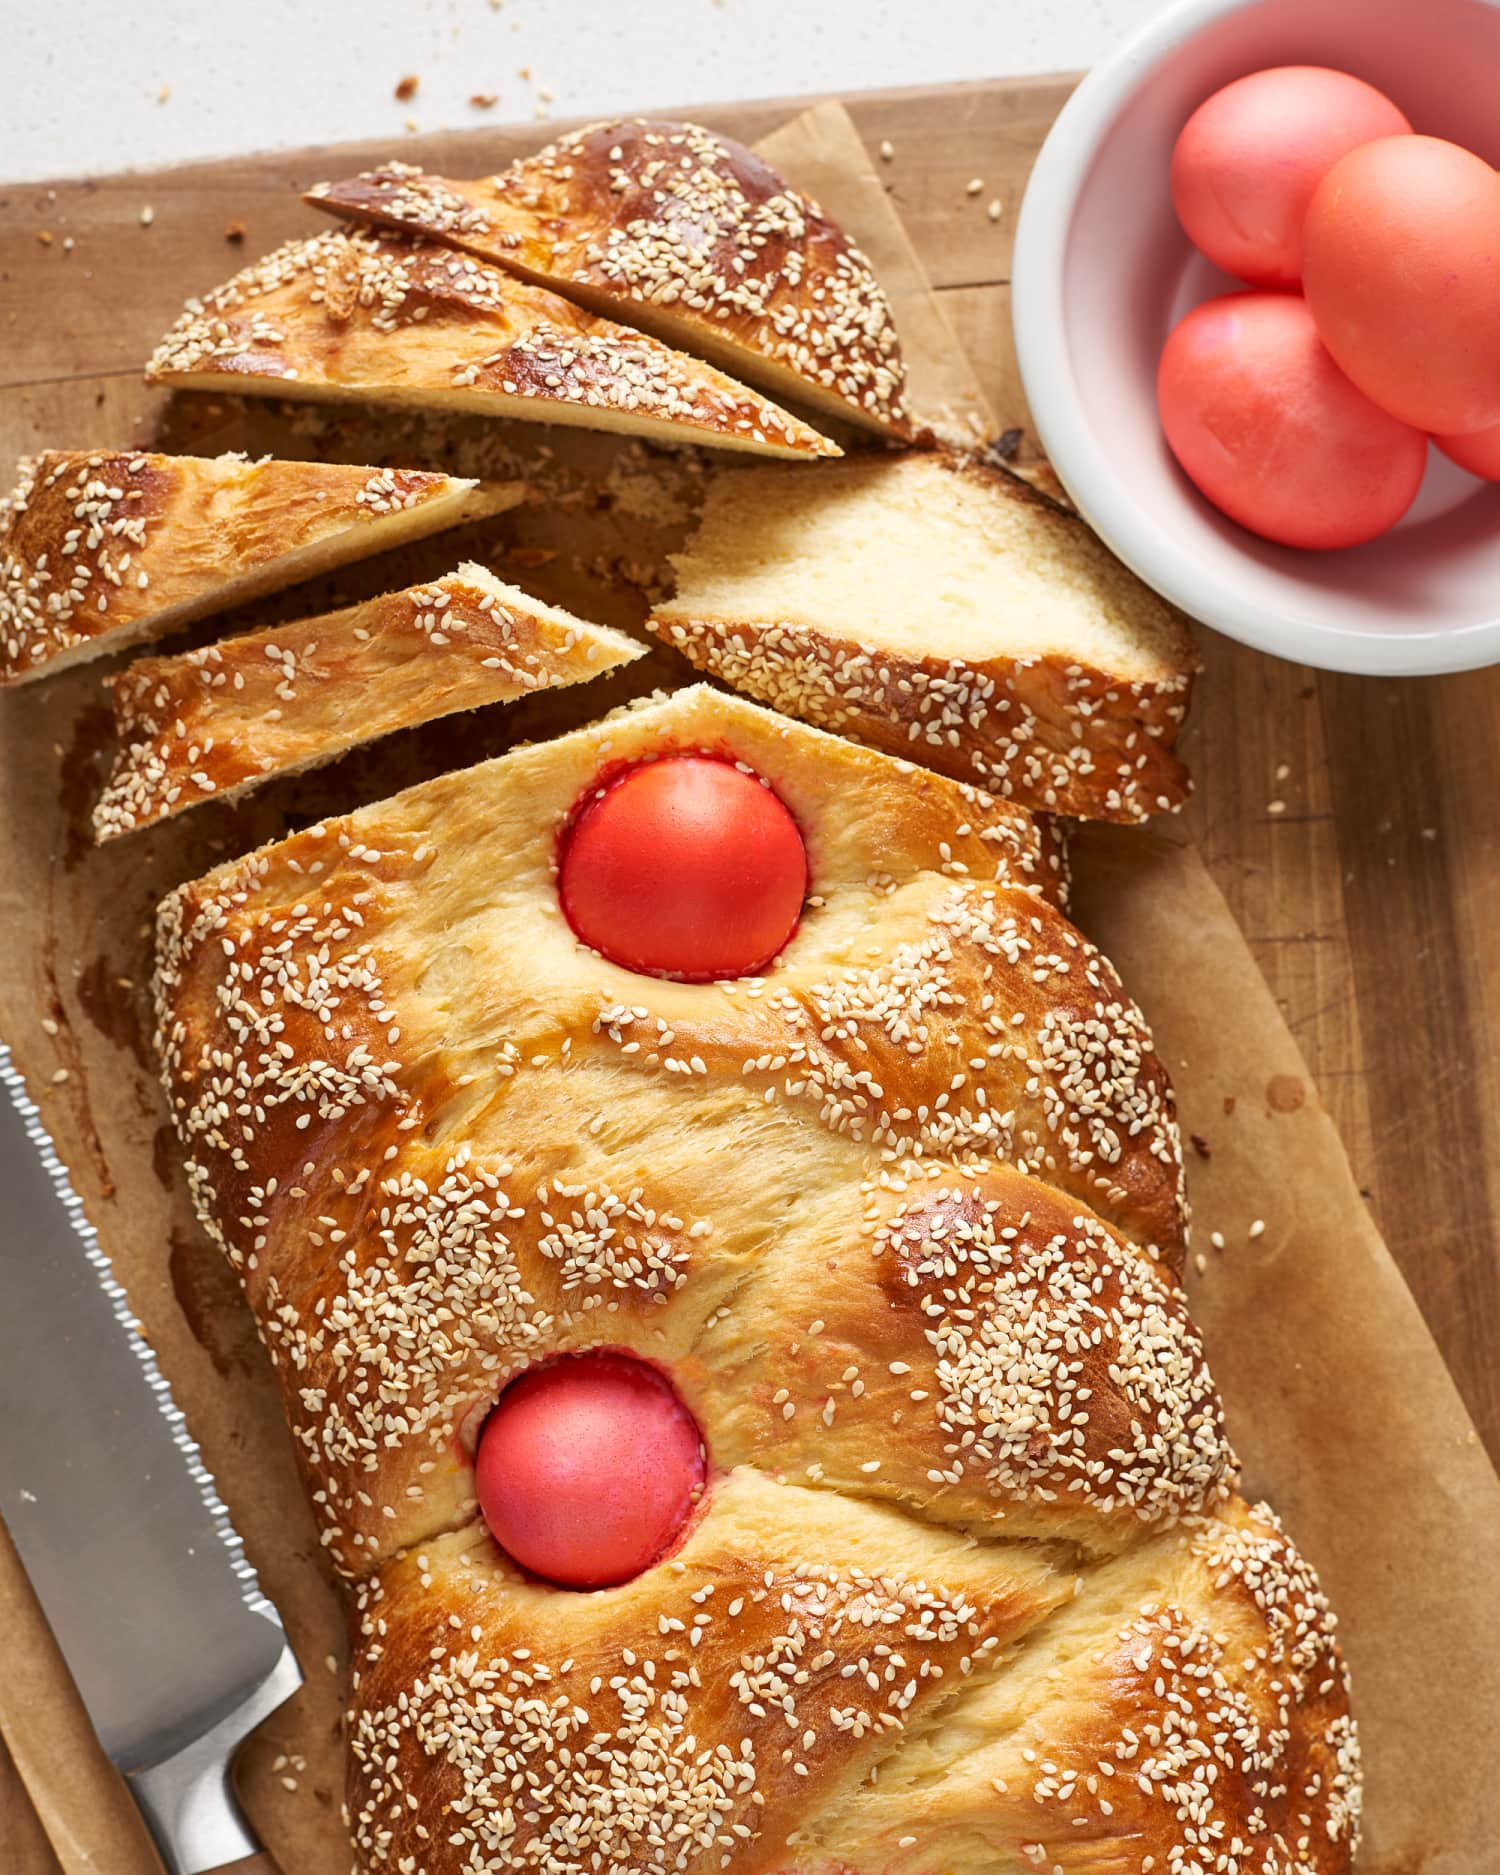 15 Best Greek Easter Bread Recipe Easy Recipes To Make at Home